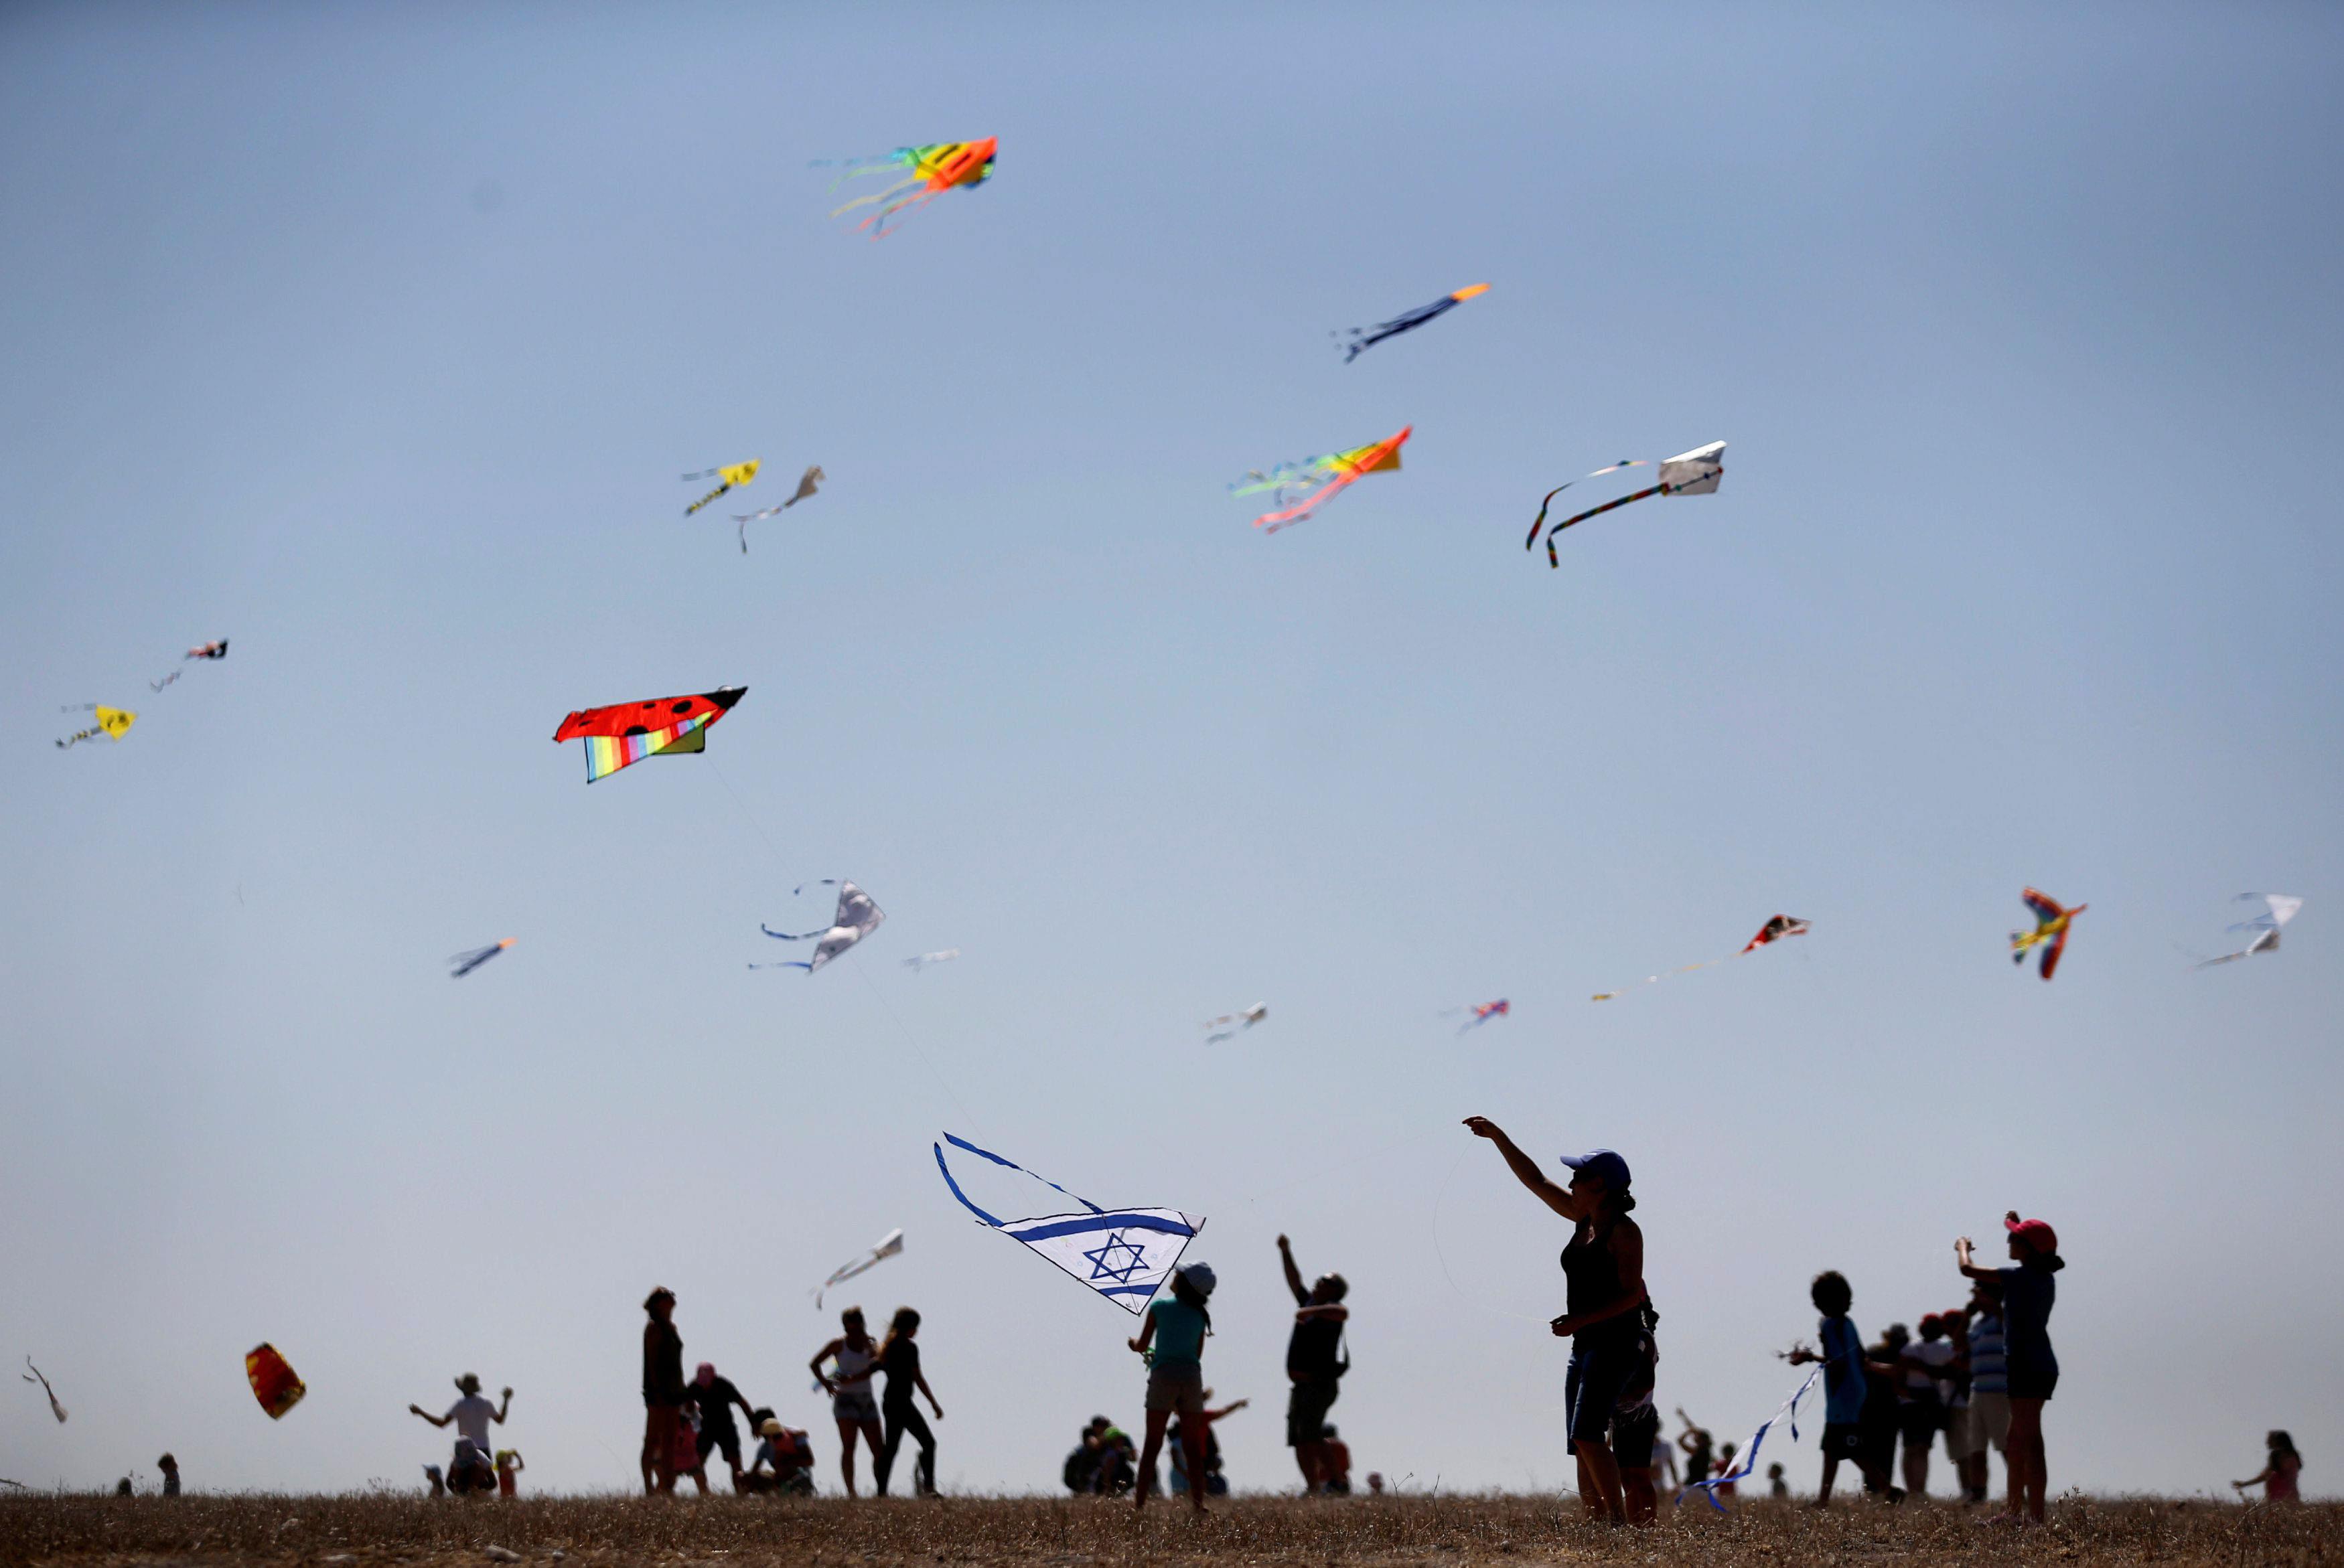 Israelis fly kites during Rosh Hashanah holiday, the first two days of the Jewish new year, in Beit 